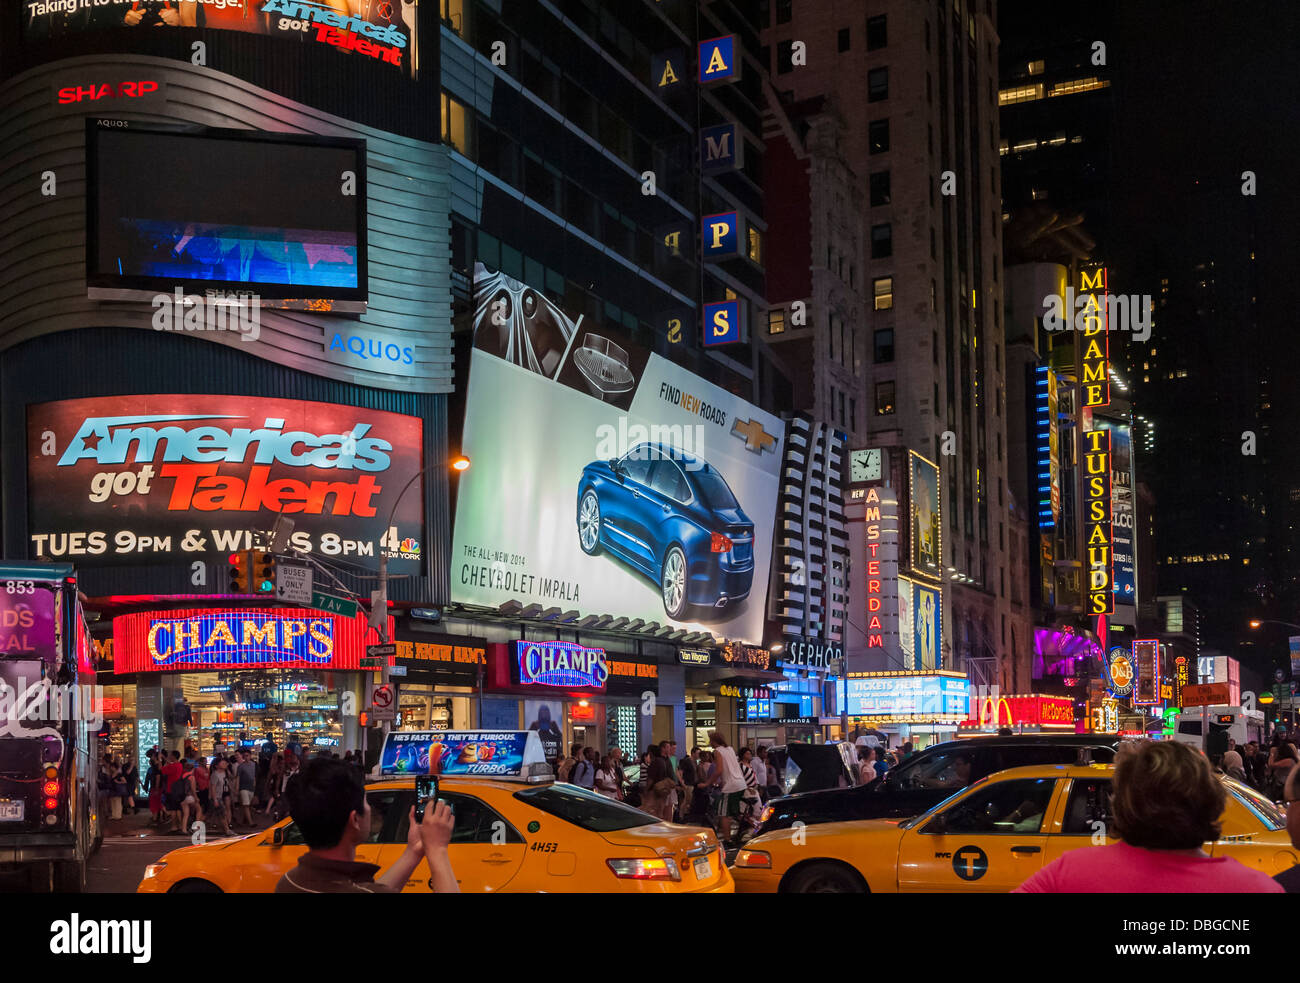 Times Square with taxi cabs, New York City at night Stock Photo